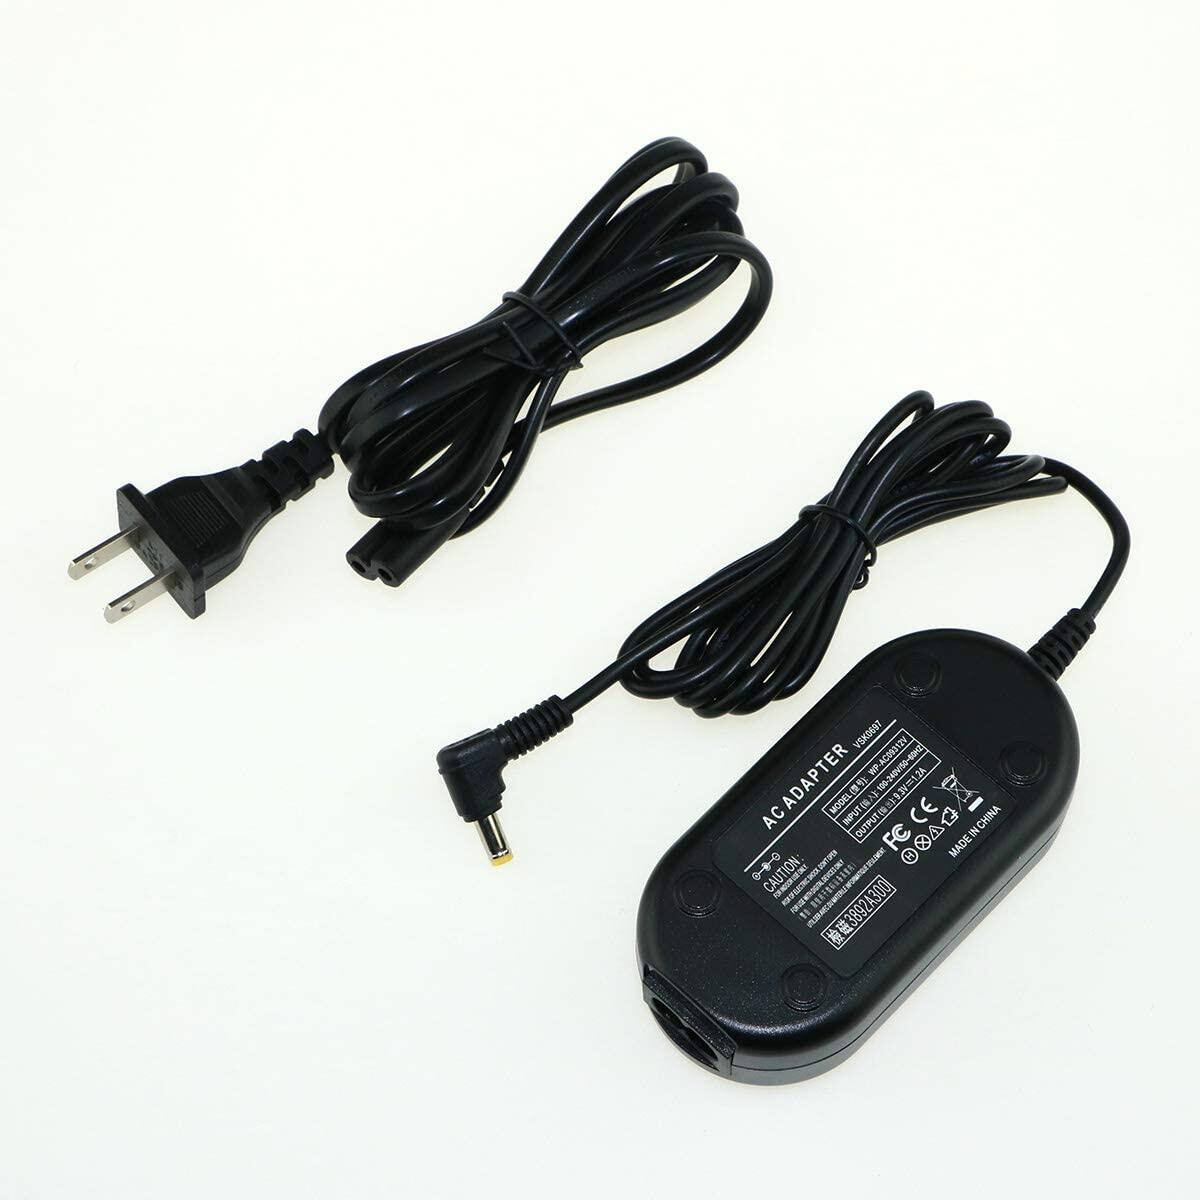 SX5 SD9 Camcorder CS Power VSK0697 VSK-0697 Replacement AC Charger for Panasonic HDC-DX1 SD1 DX3 SD7 SD3 HS9 